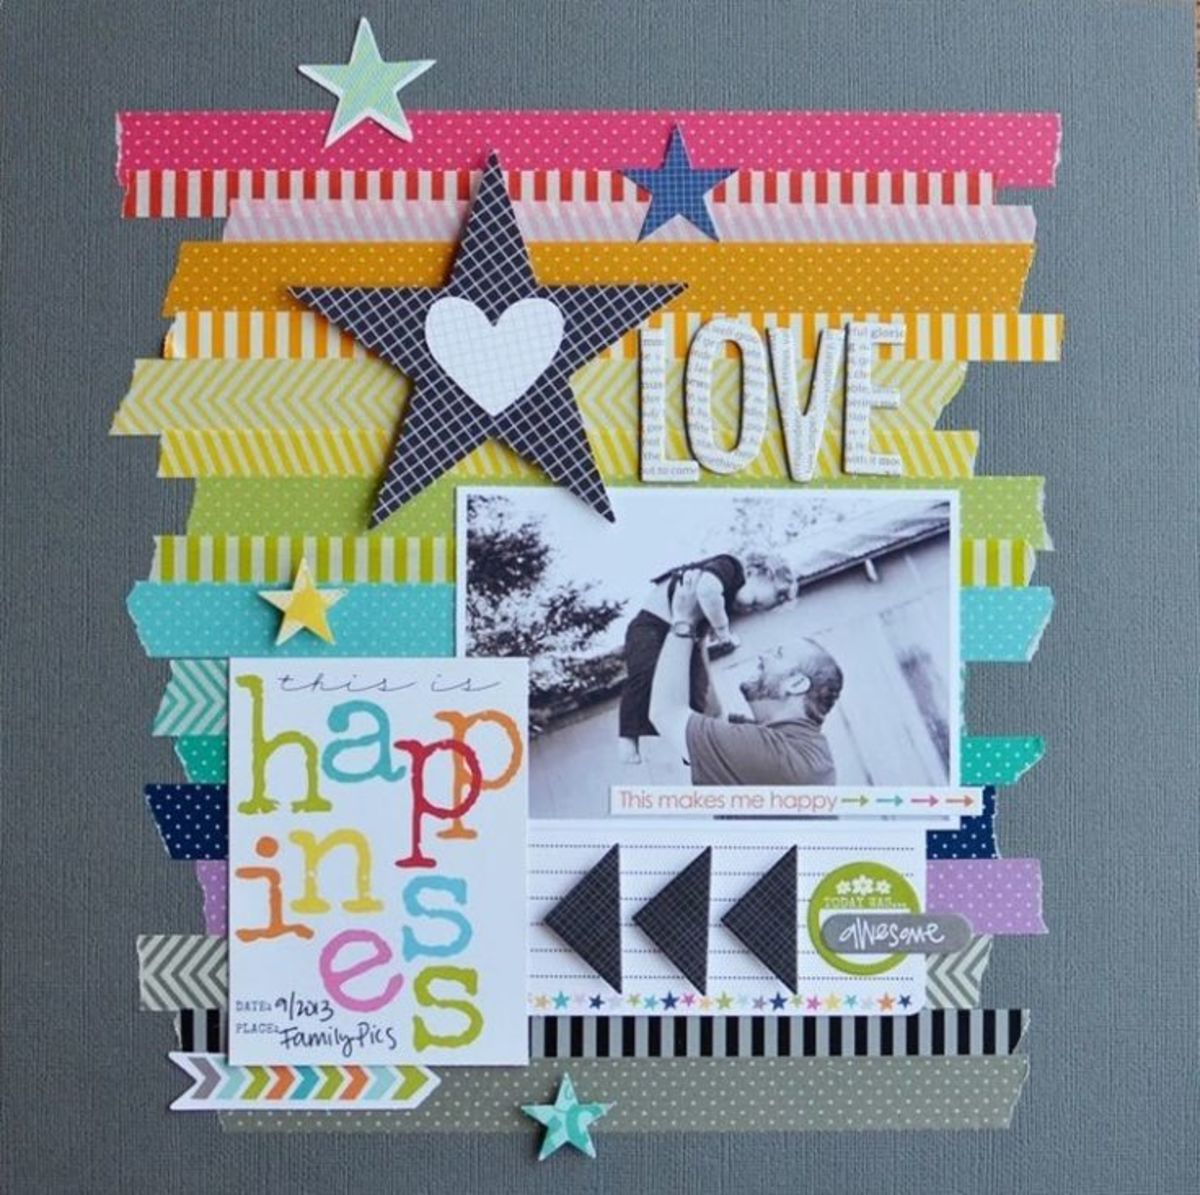 There are so many ways to use washi tape on scrapbook pages. Let's explore some ideas together